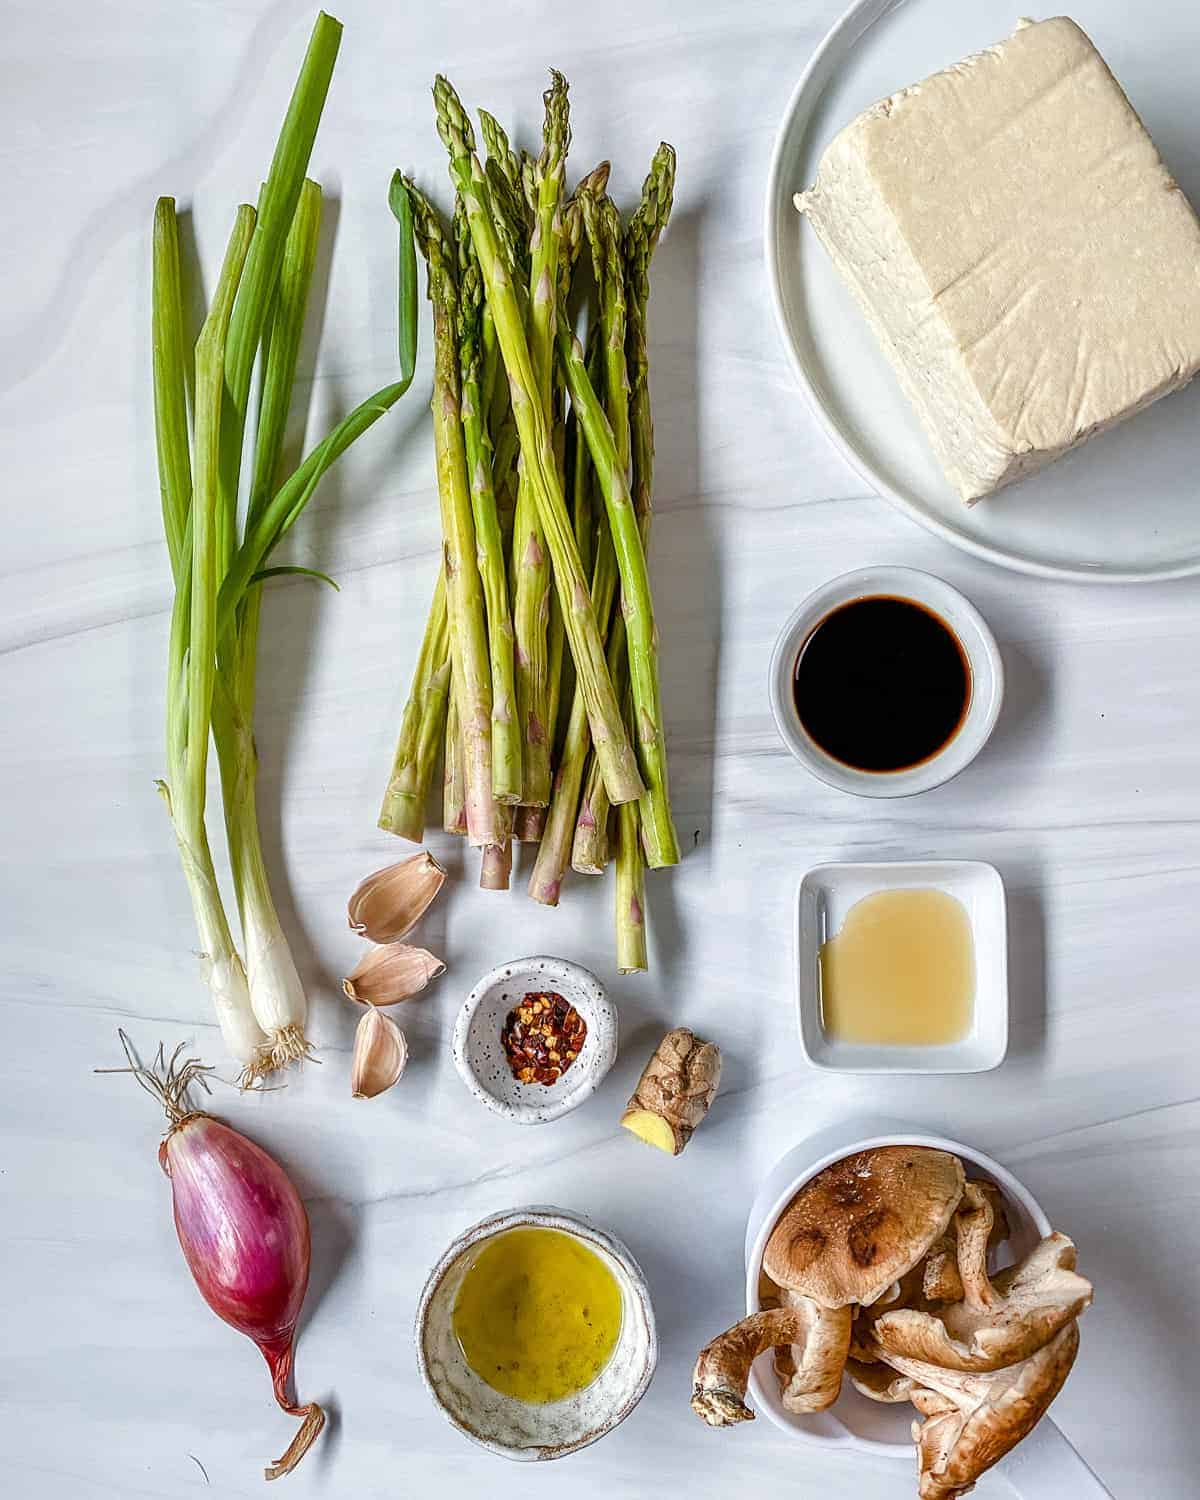 ingredients for Shiitake Asparagus Tofu Stir-fry against a white surface